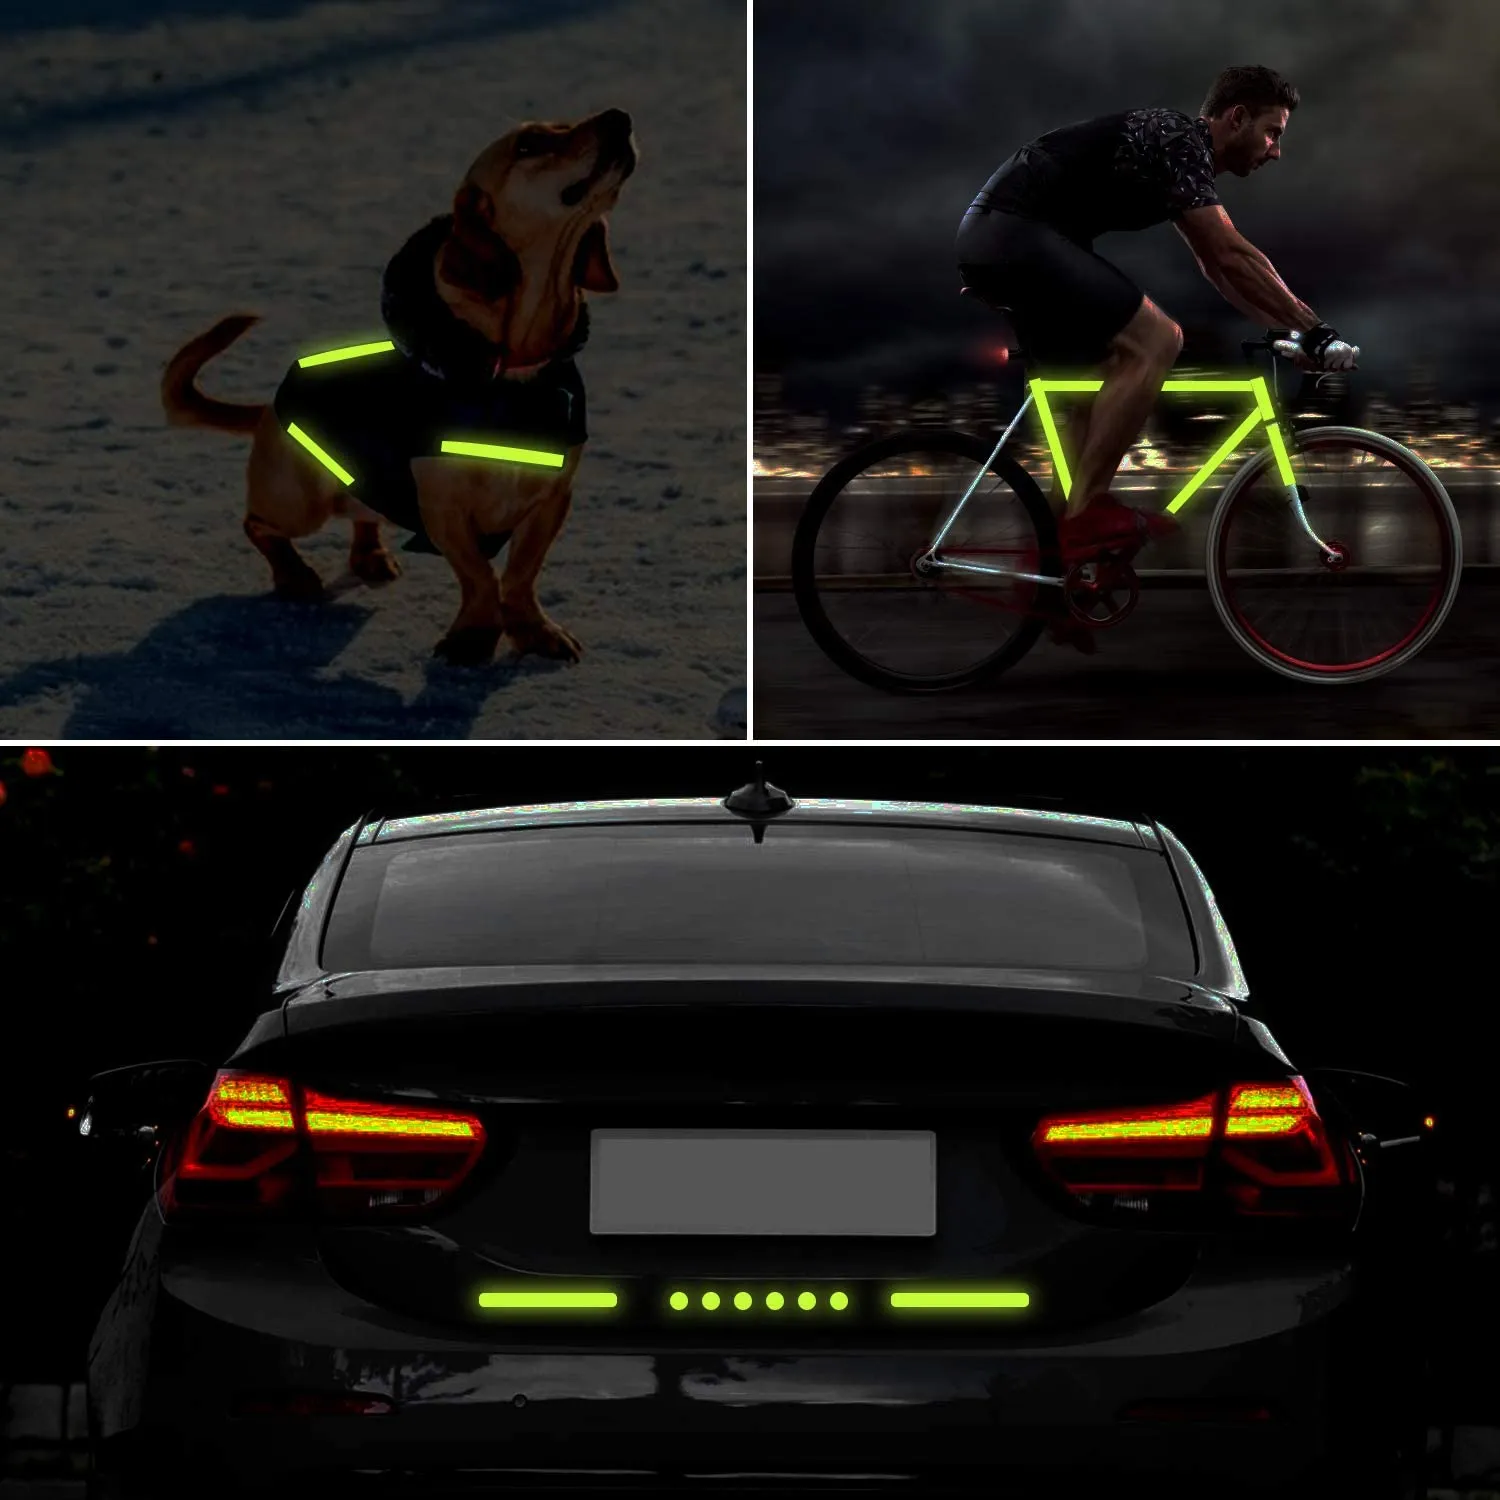 Bike Stickers Reflective Tape Outdoor Safety Warning Lighting Sticker Waterproof Bike Reflector Tape for Car Bicycle, Motorcycle